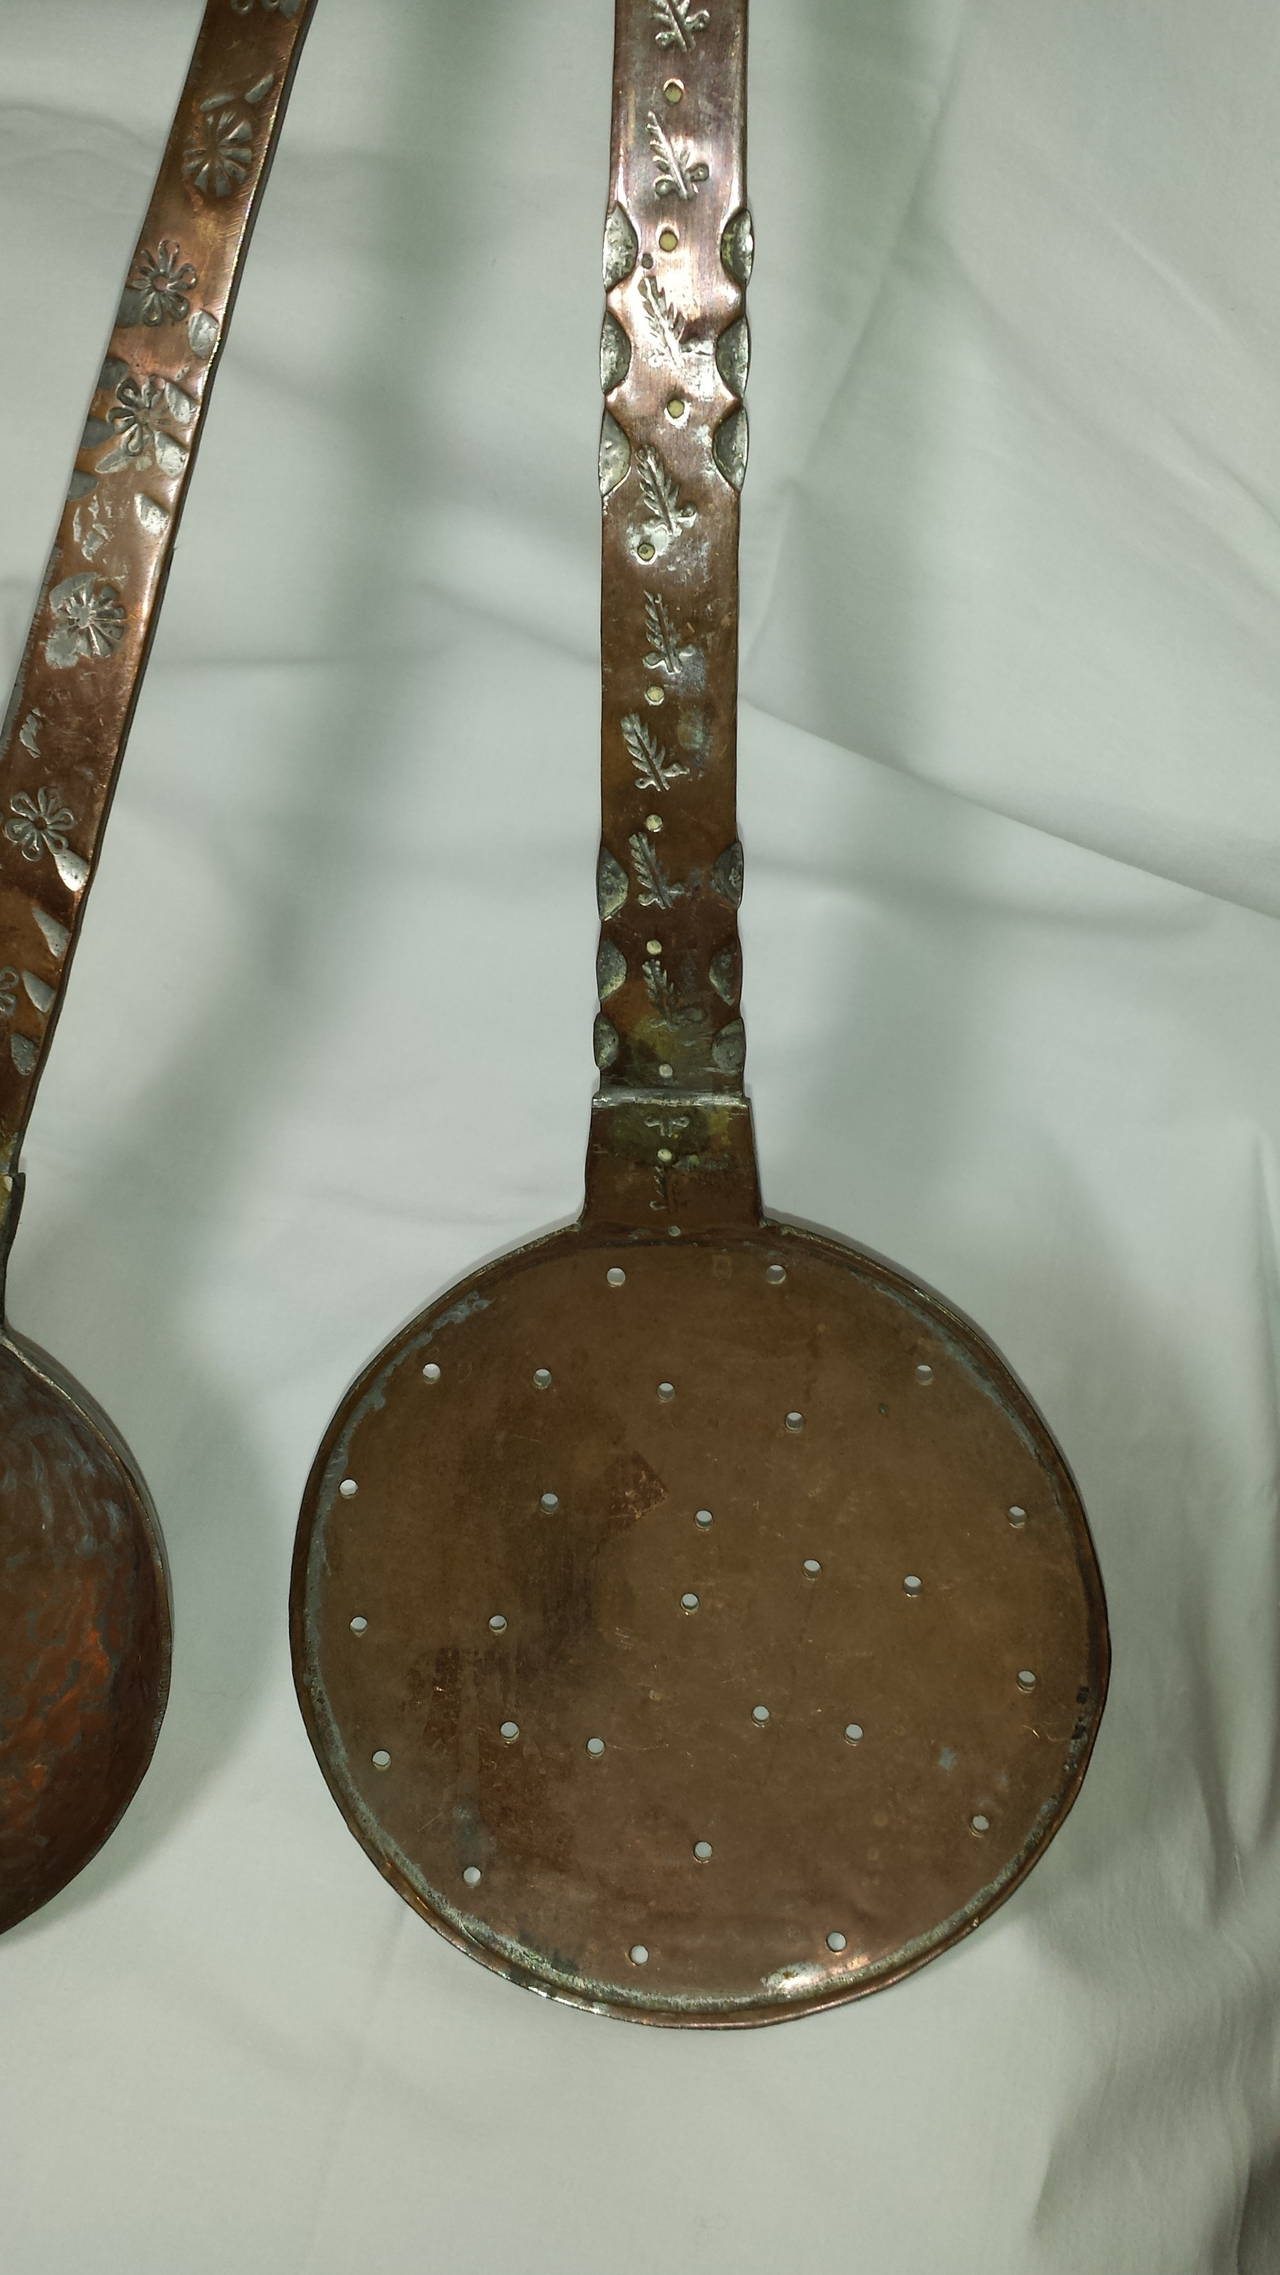 A Pair of Large Copper Cooking Utensils Ladle & Strainer For Fire Place, Hand made and decorated handles, consists of a large strainer and a large ladle, both measure 21 1/2"-inches long and about 6 3/4"-inches wide. Handles are